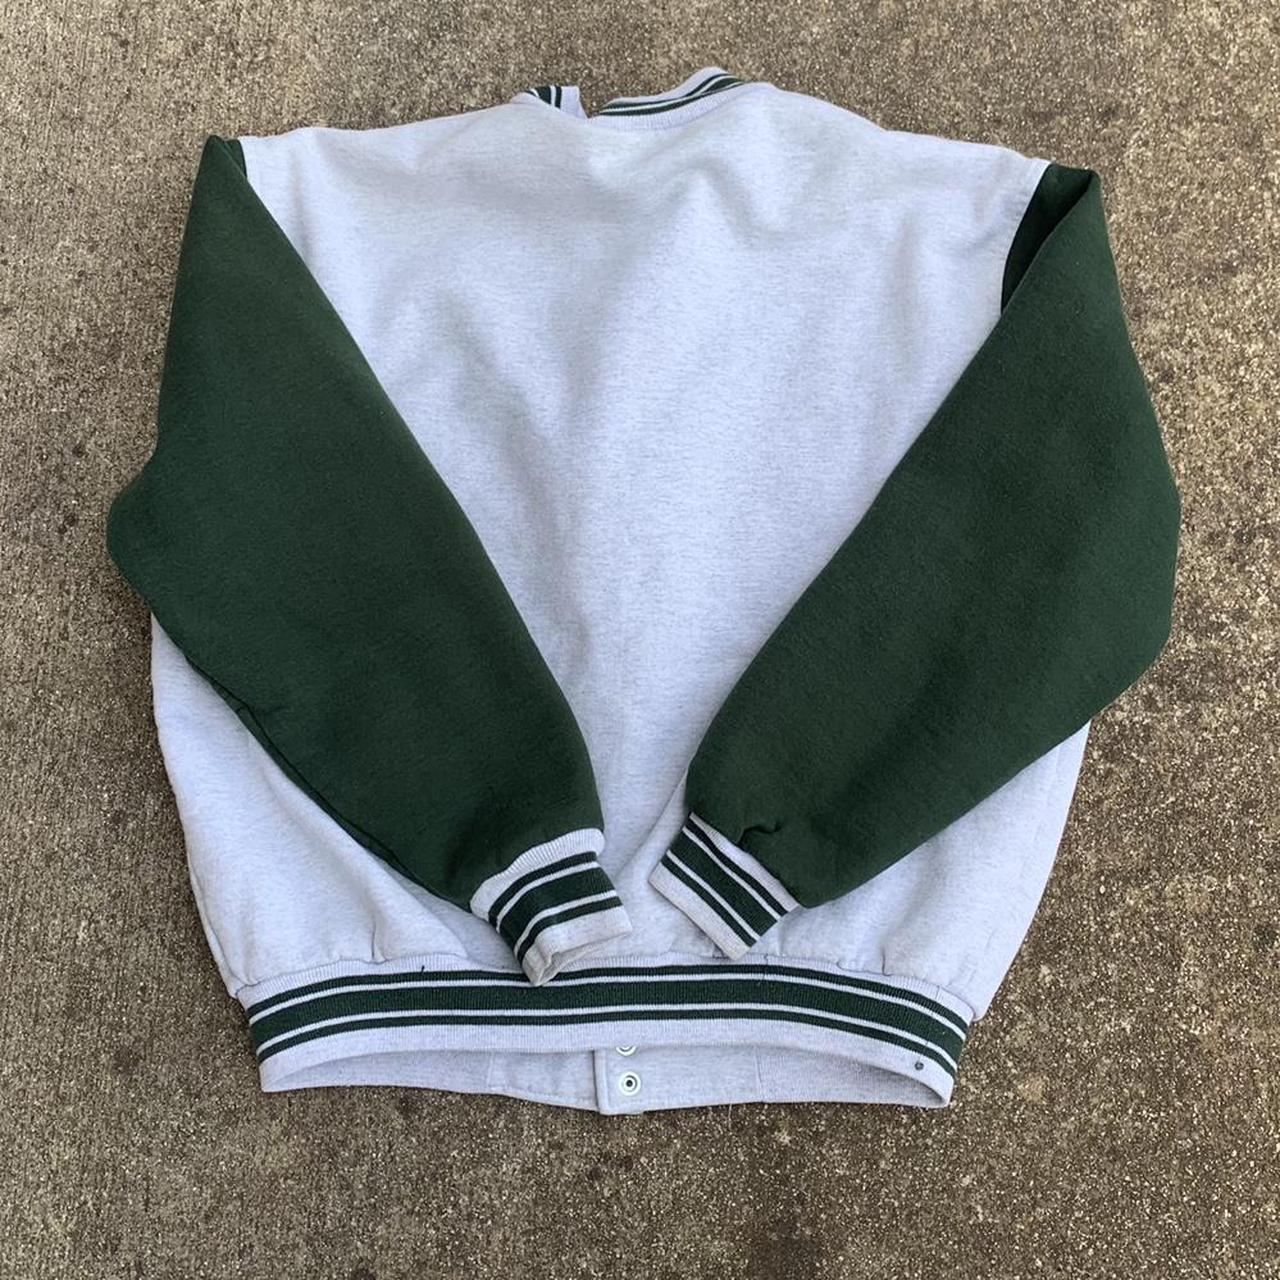 American Vintage Men's Green and White Jacket (4)